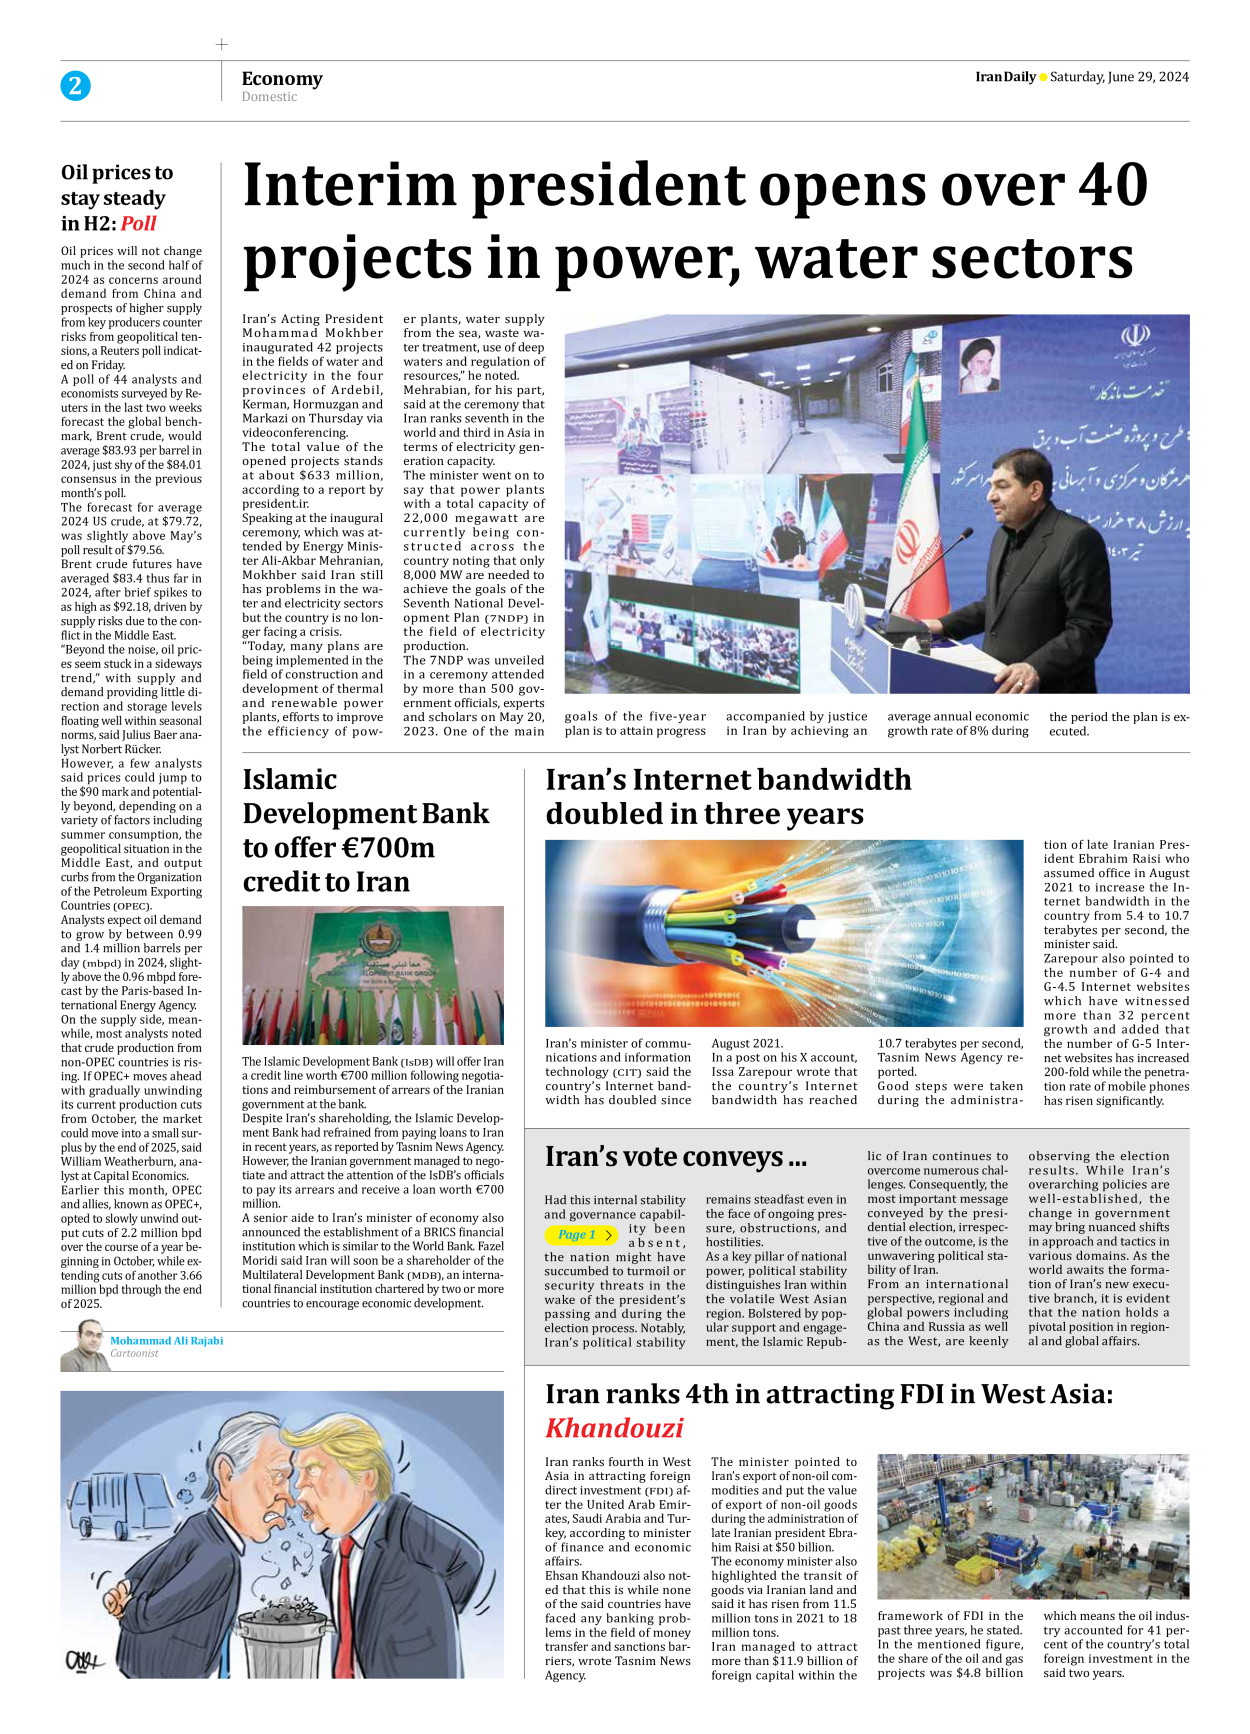 Iran Daily - Number Seven Thousand Five Hundred and Ninety One - 29 June 2024 - Page 2